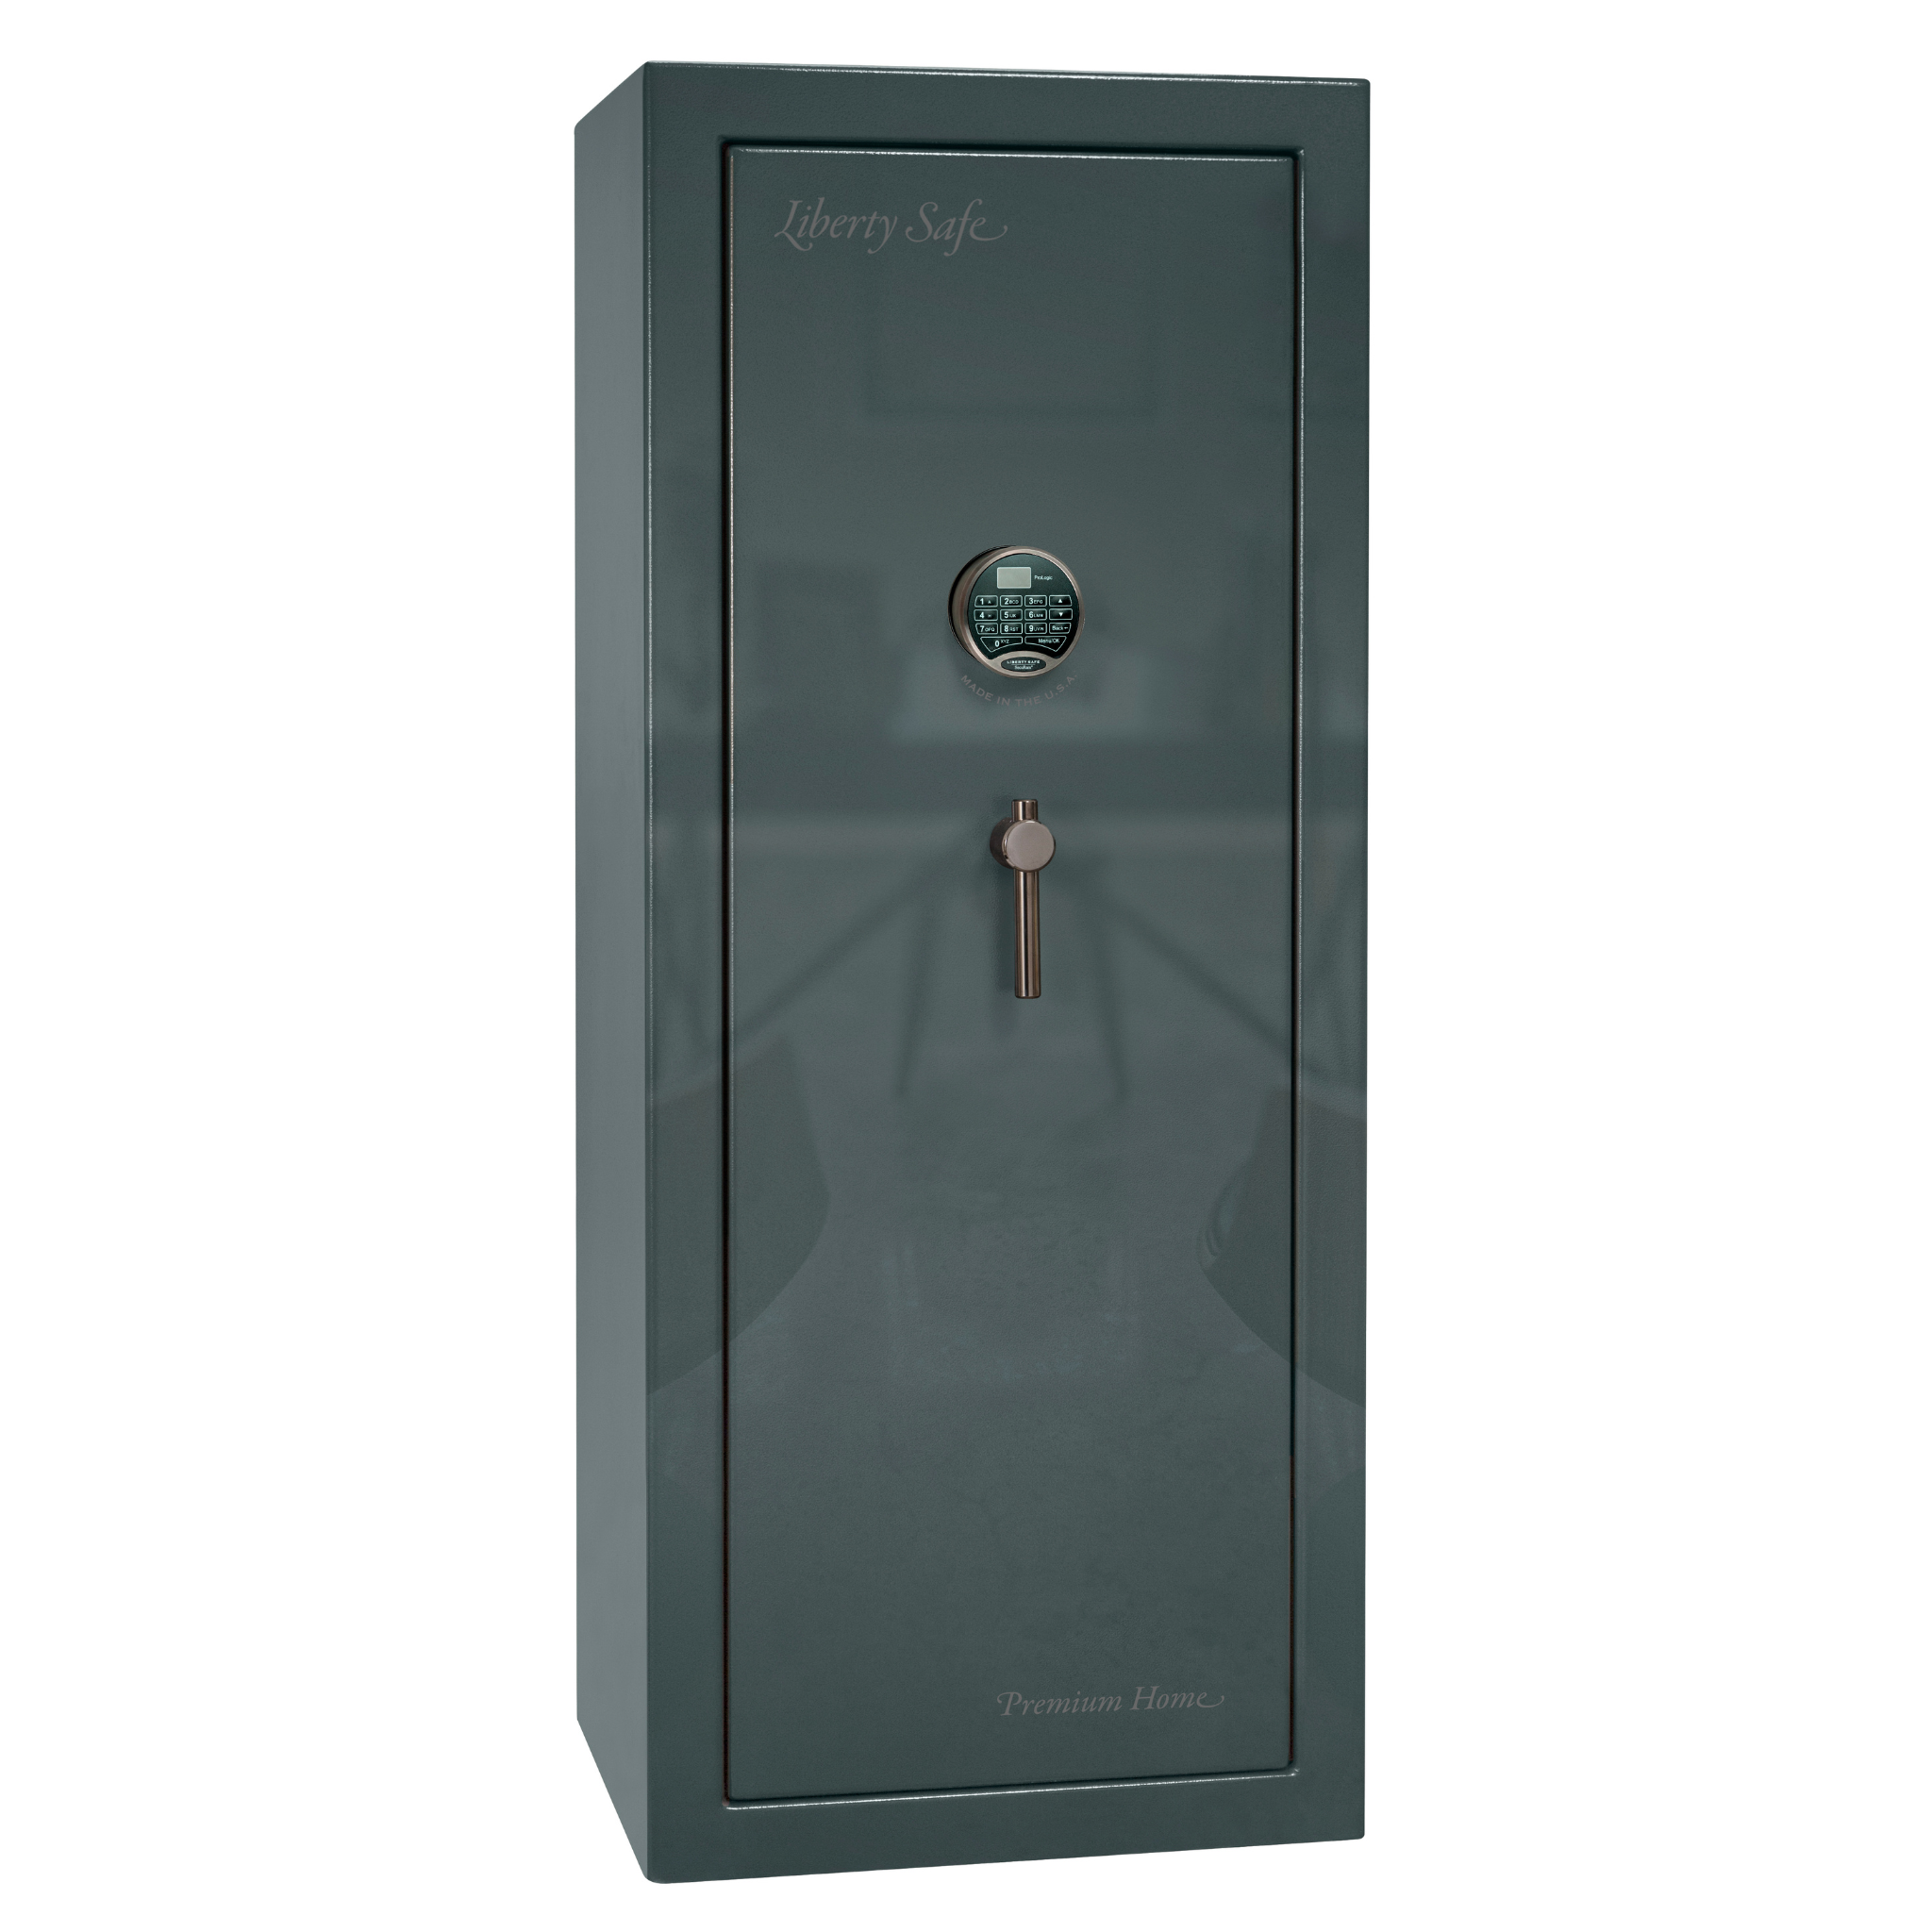 Premium Home Series | Level 7 Security | 2 Hour Fire Protection | 17 | Dimensions: 60.25"(H) x 24.5"(W) x 19"(D) | Forest Mist Gloss - Closed Door